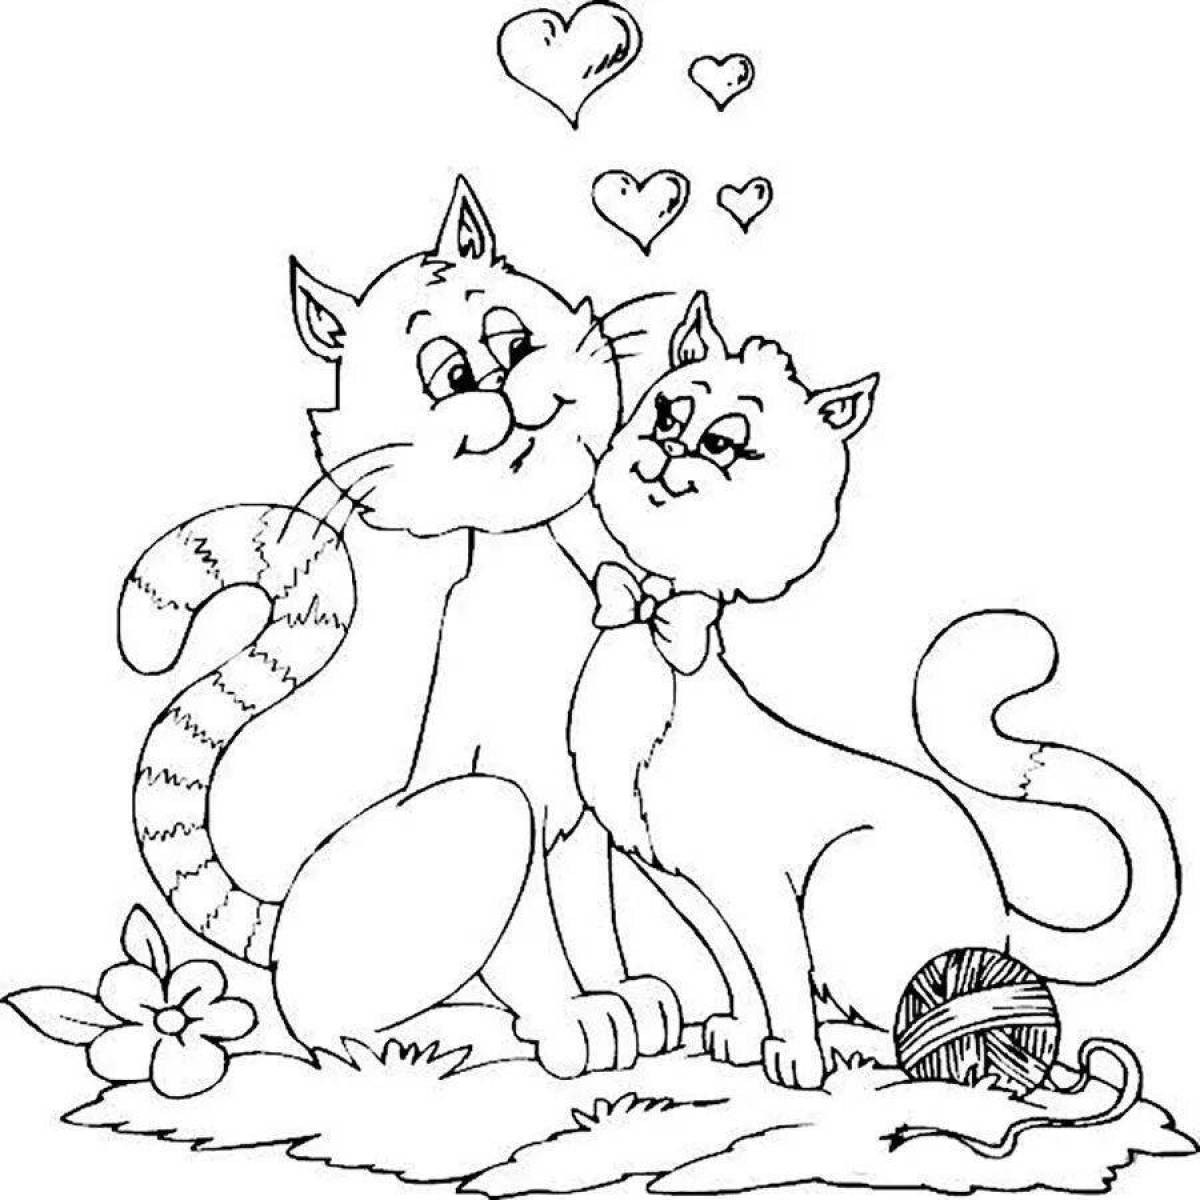 Smiling cat family coloring page